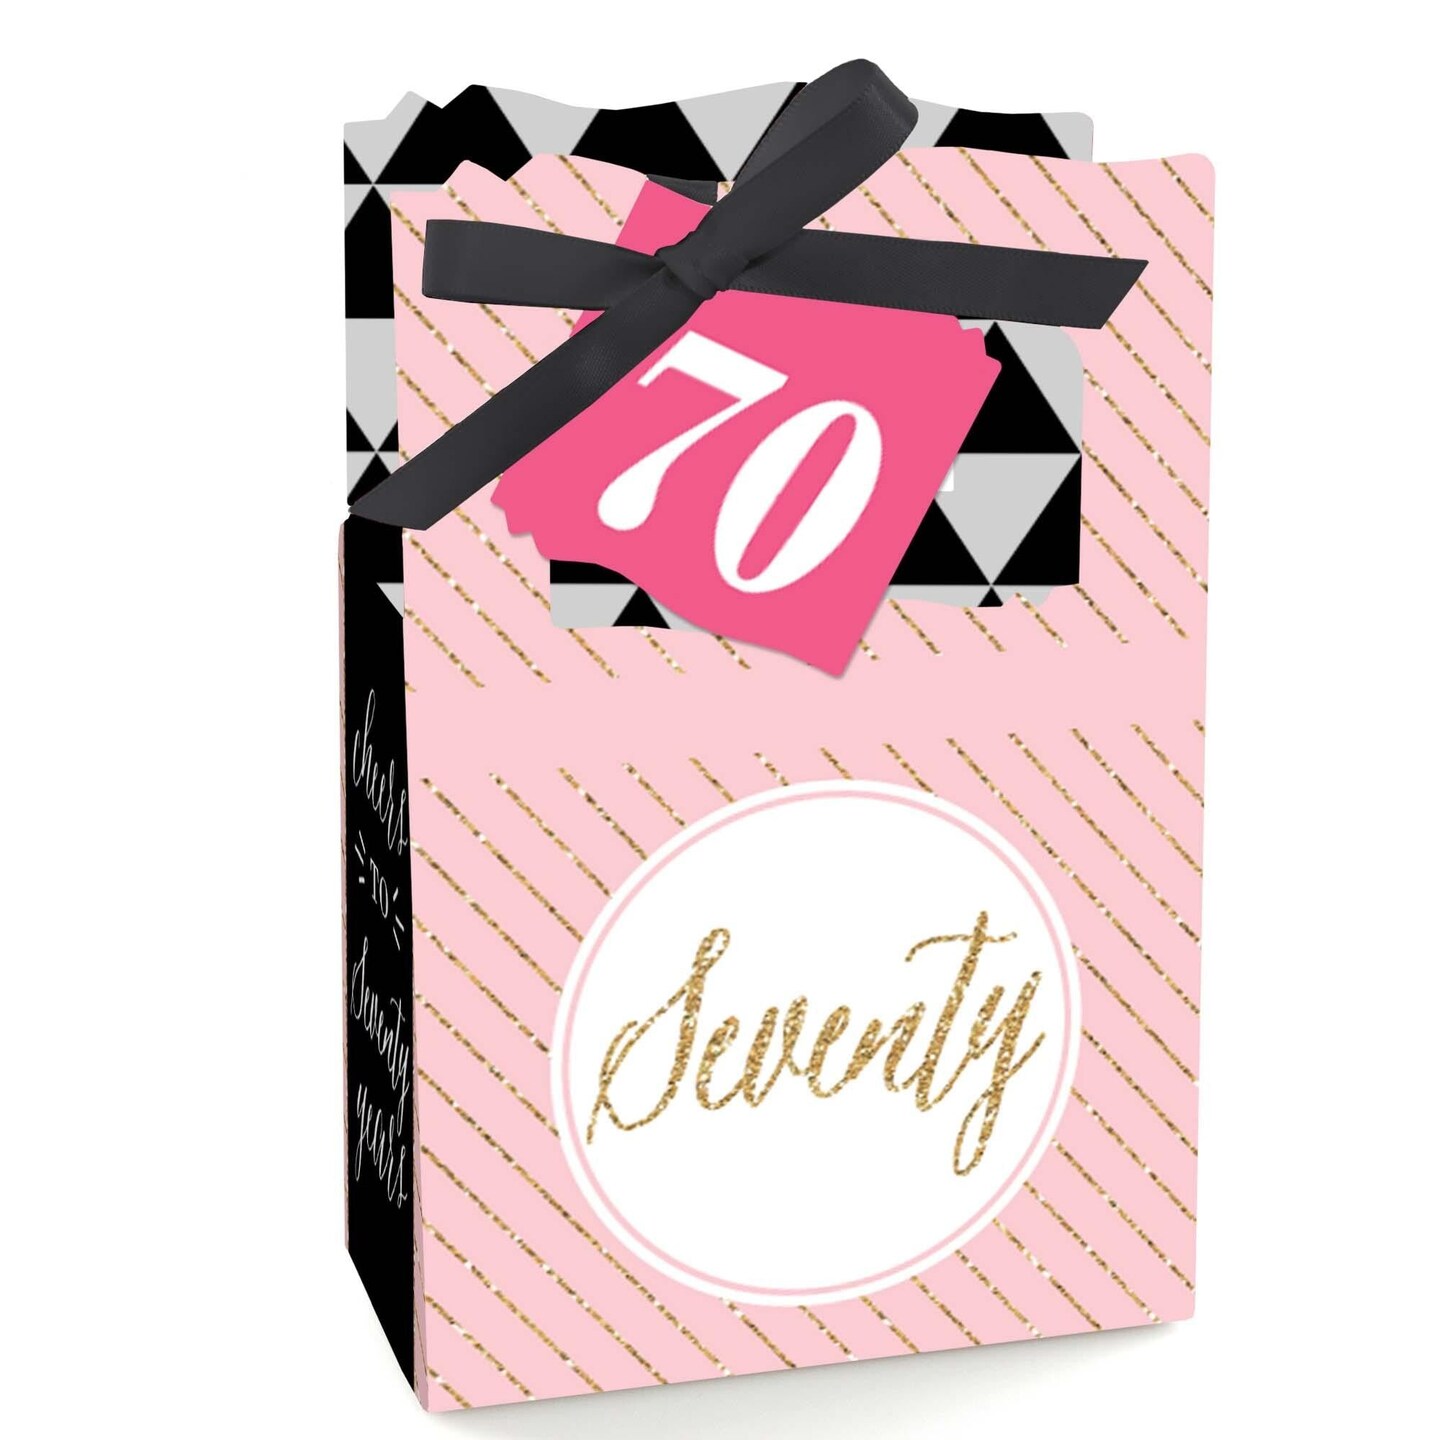 Big Dot of Happiness Chic 70th Birthday - Pink, Black and Gold - Party Favor Boxes - Set of 12